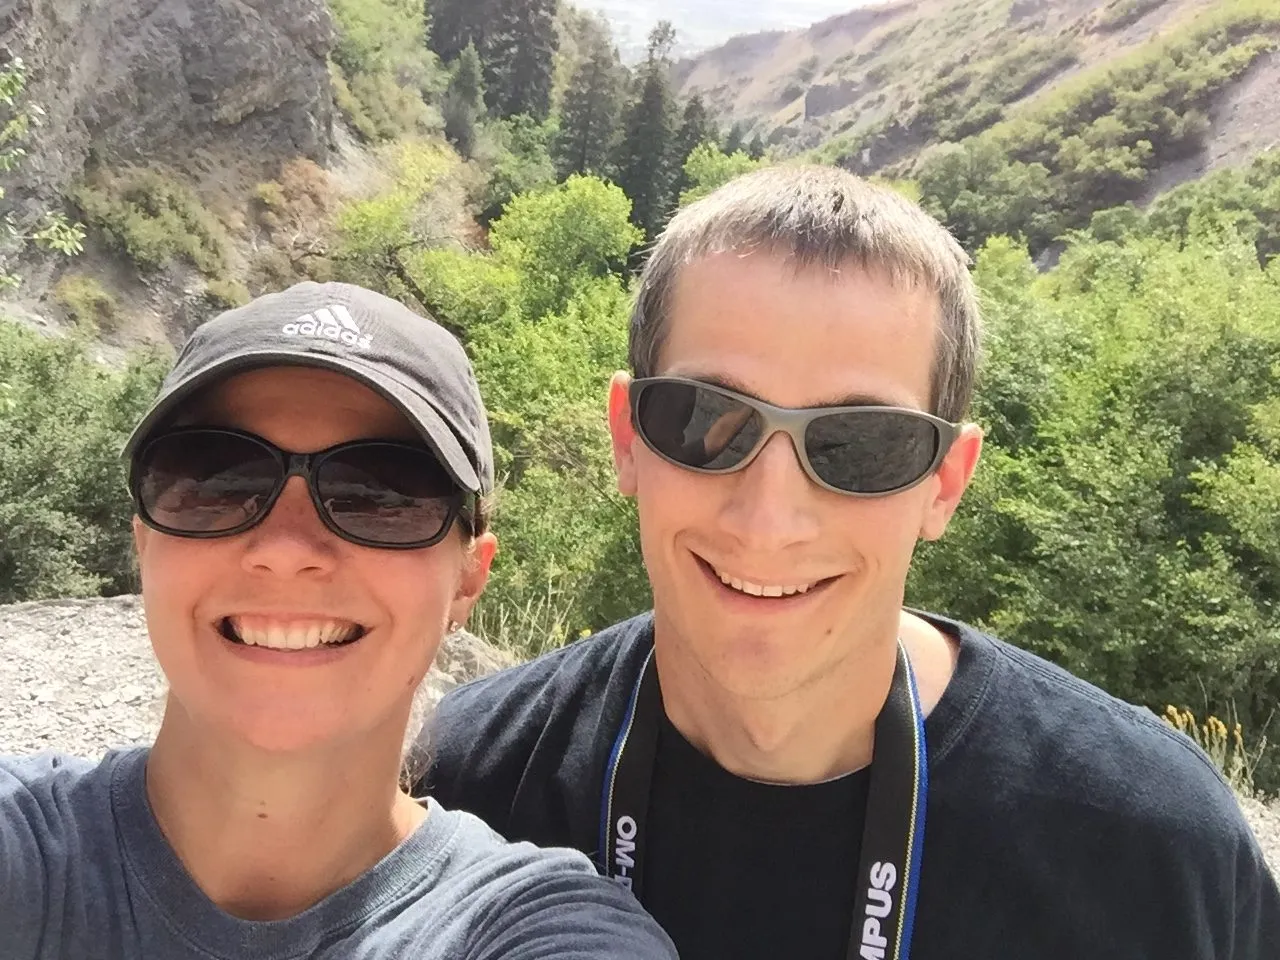 Keith and Lindsey taking a selfie while on a hike